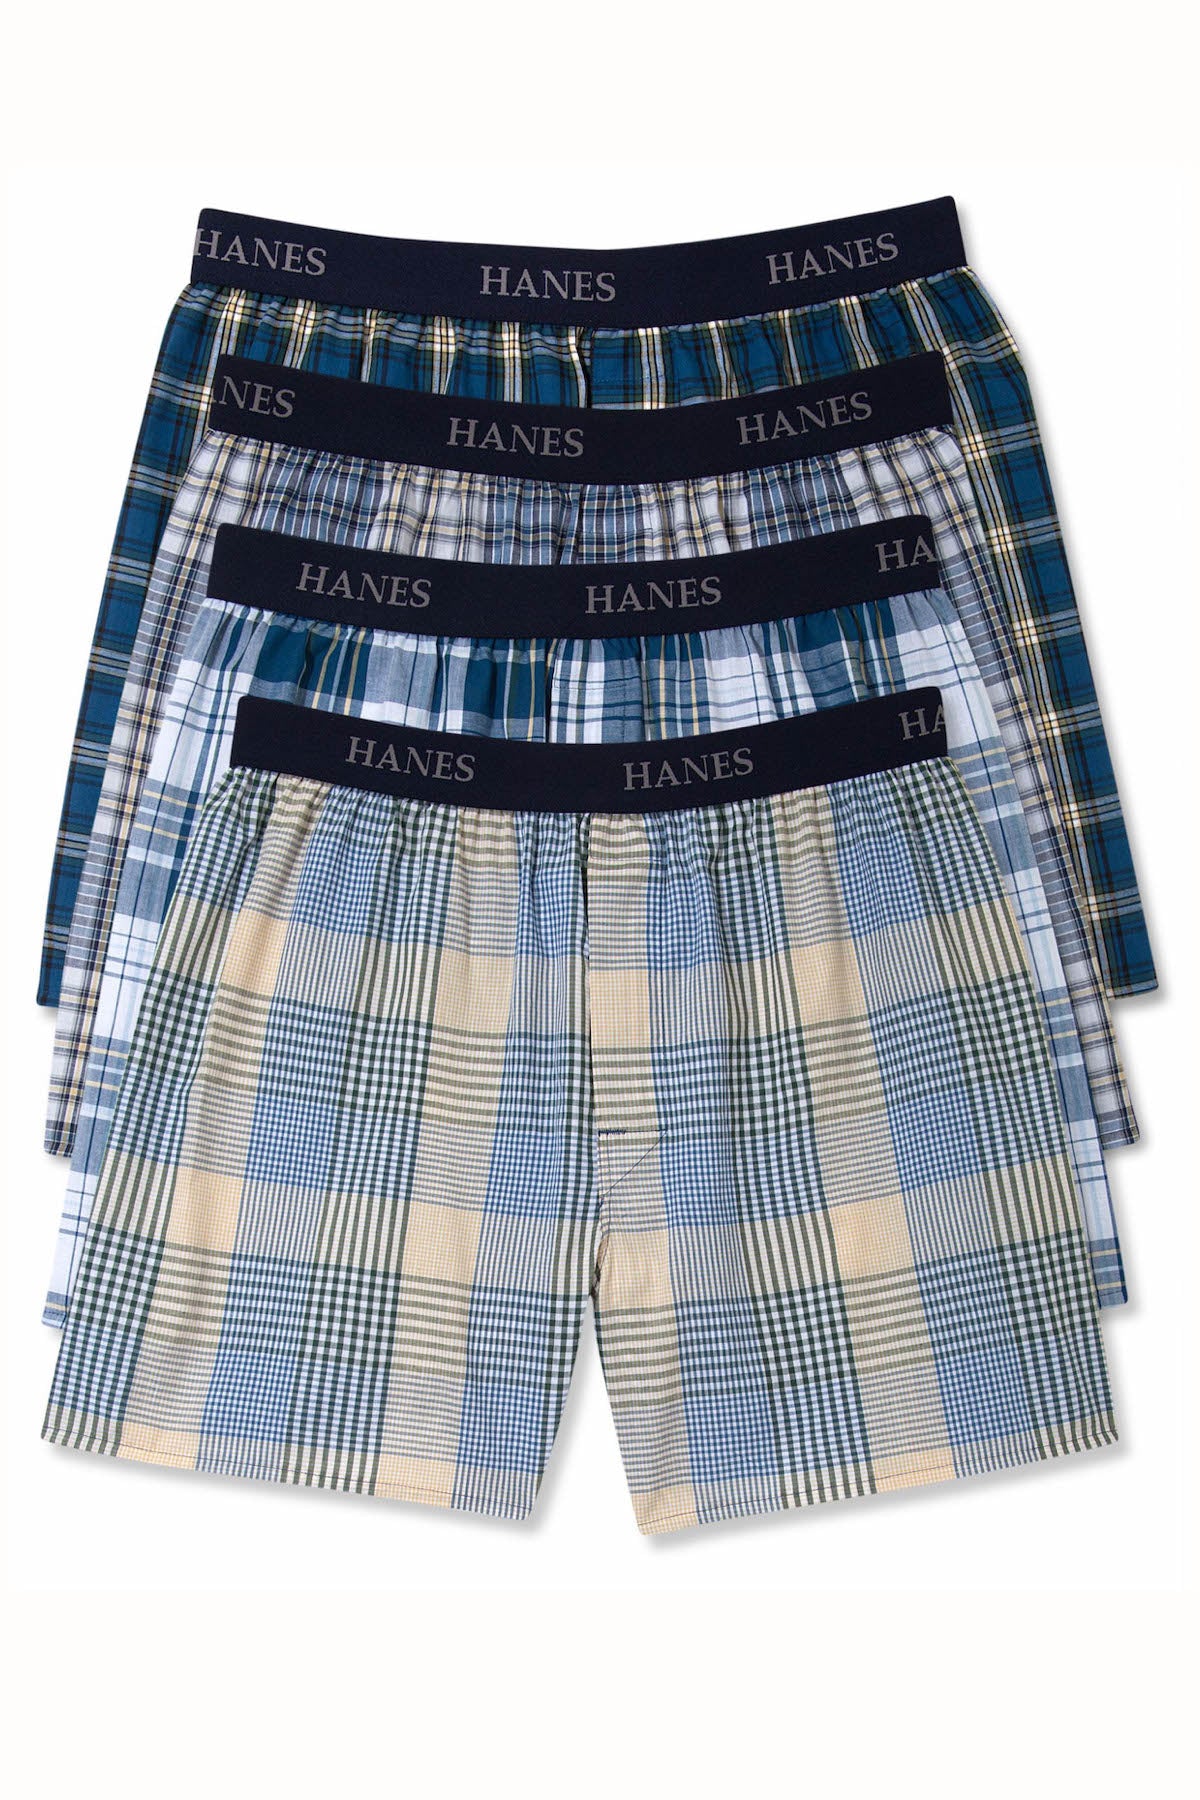 Hanes Assorted Blue Plaid Tagless Boxer Short 4-Pack